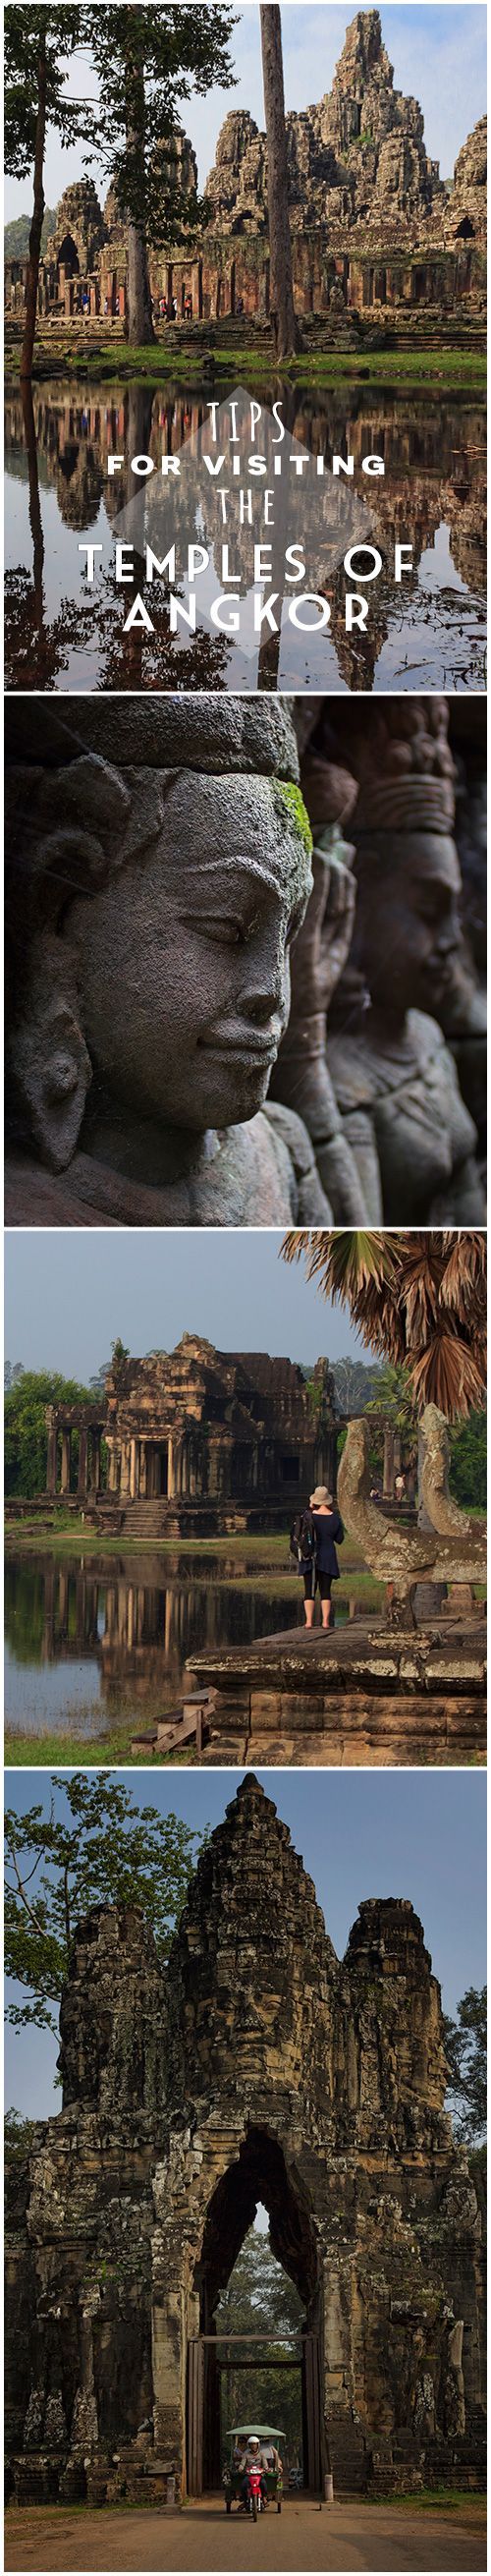 Tips and suggestions for planning at visit to the Temples of Angkor, Cambodia. #traveltips